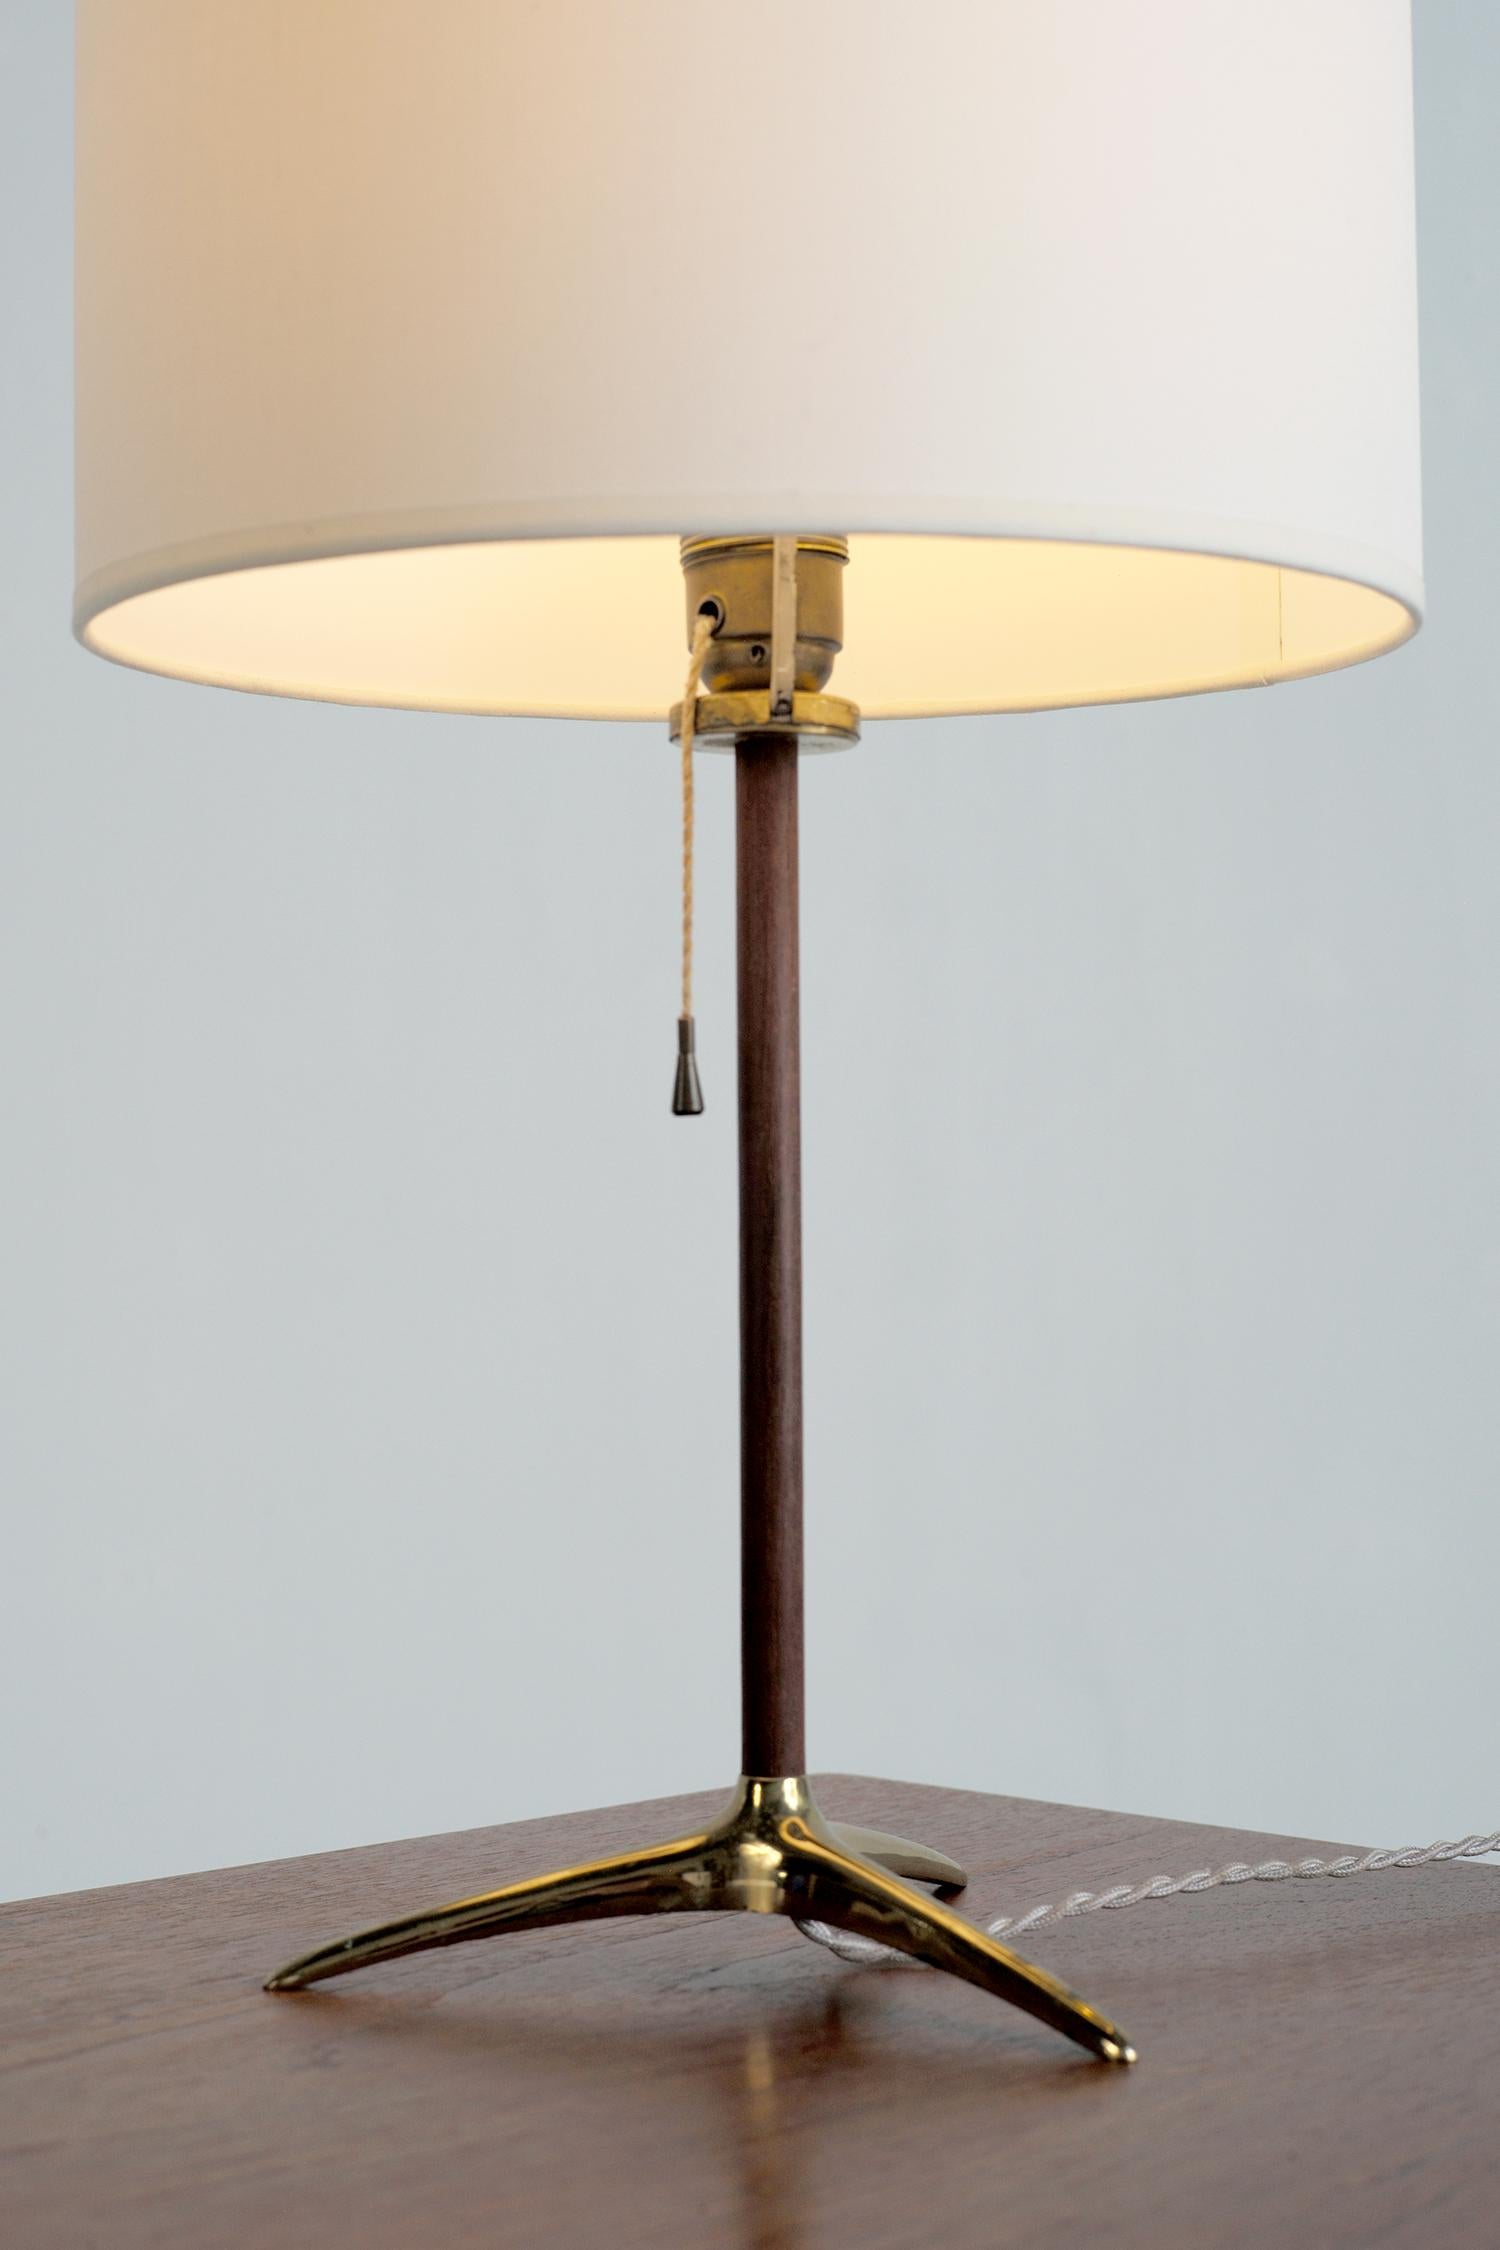 Elegant table lamp by Gérard Thurston, USA 1950. It rests on a tripod base in gilded brass, the barrel is in walnut. The ignition is operated by a pull switch. The cylindrical lampshade is fixed at the top by a gilt brass pancake. Very good